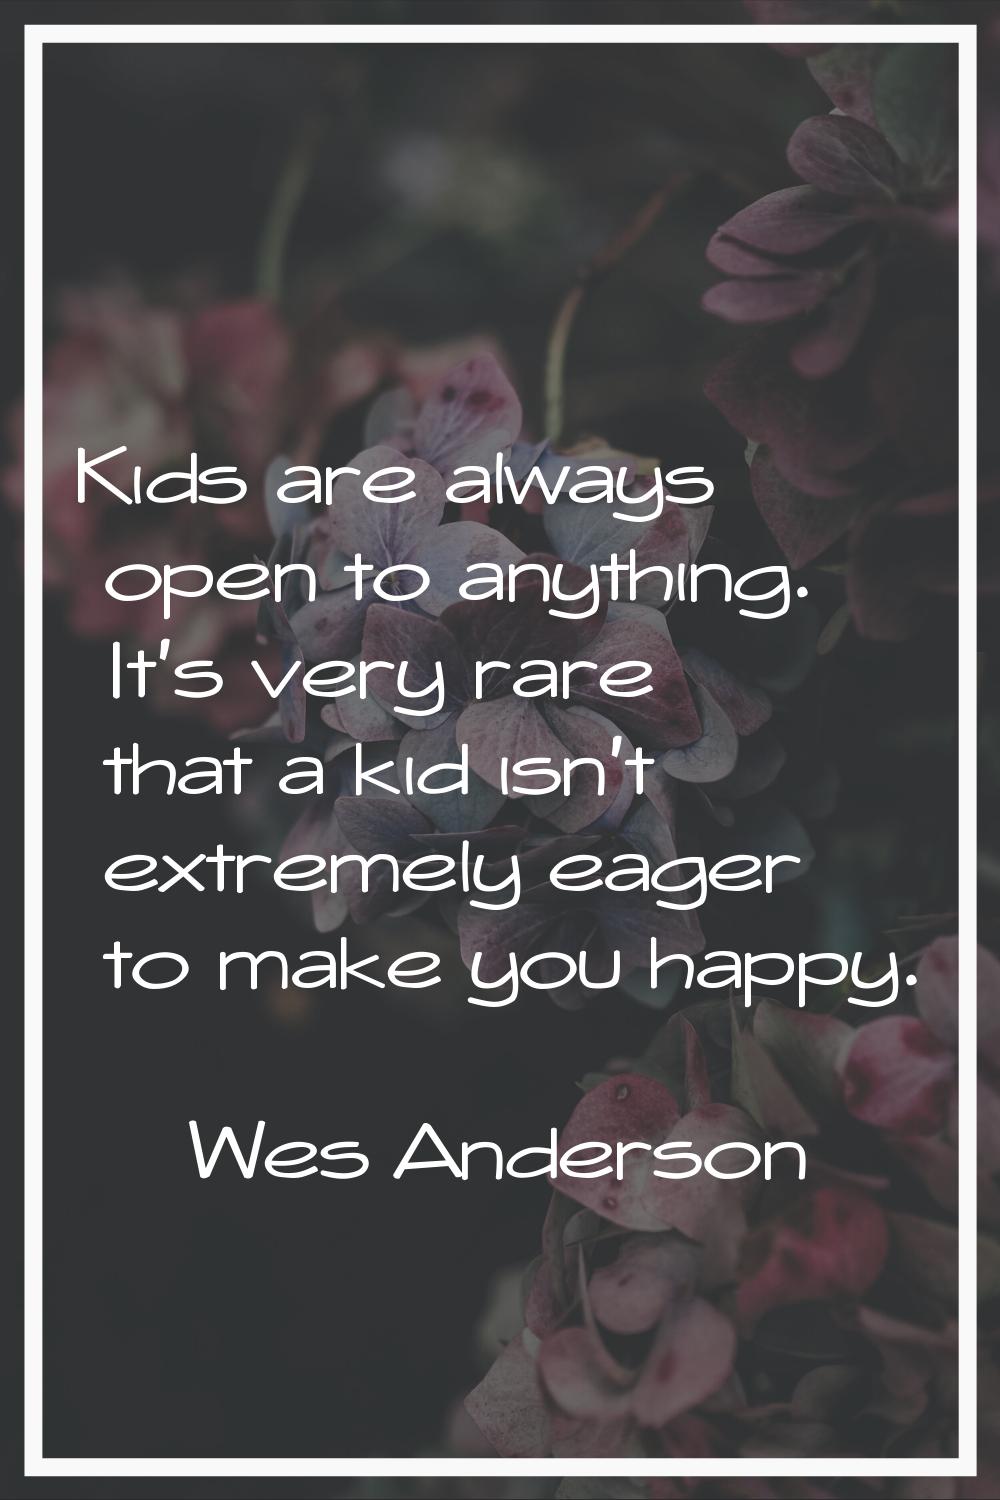 Kids are always open to anything. It's very rare that a kid isn't extremely eager to make you happy